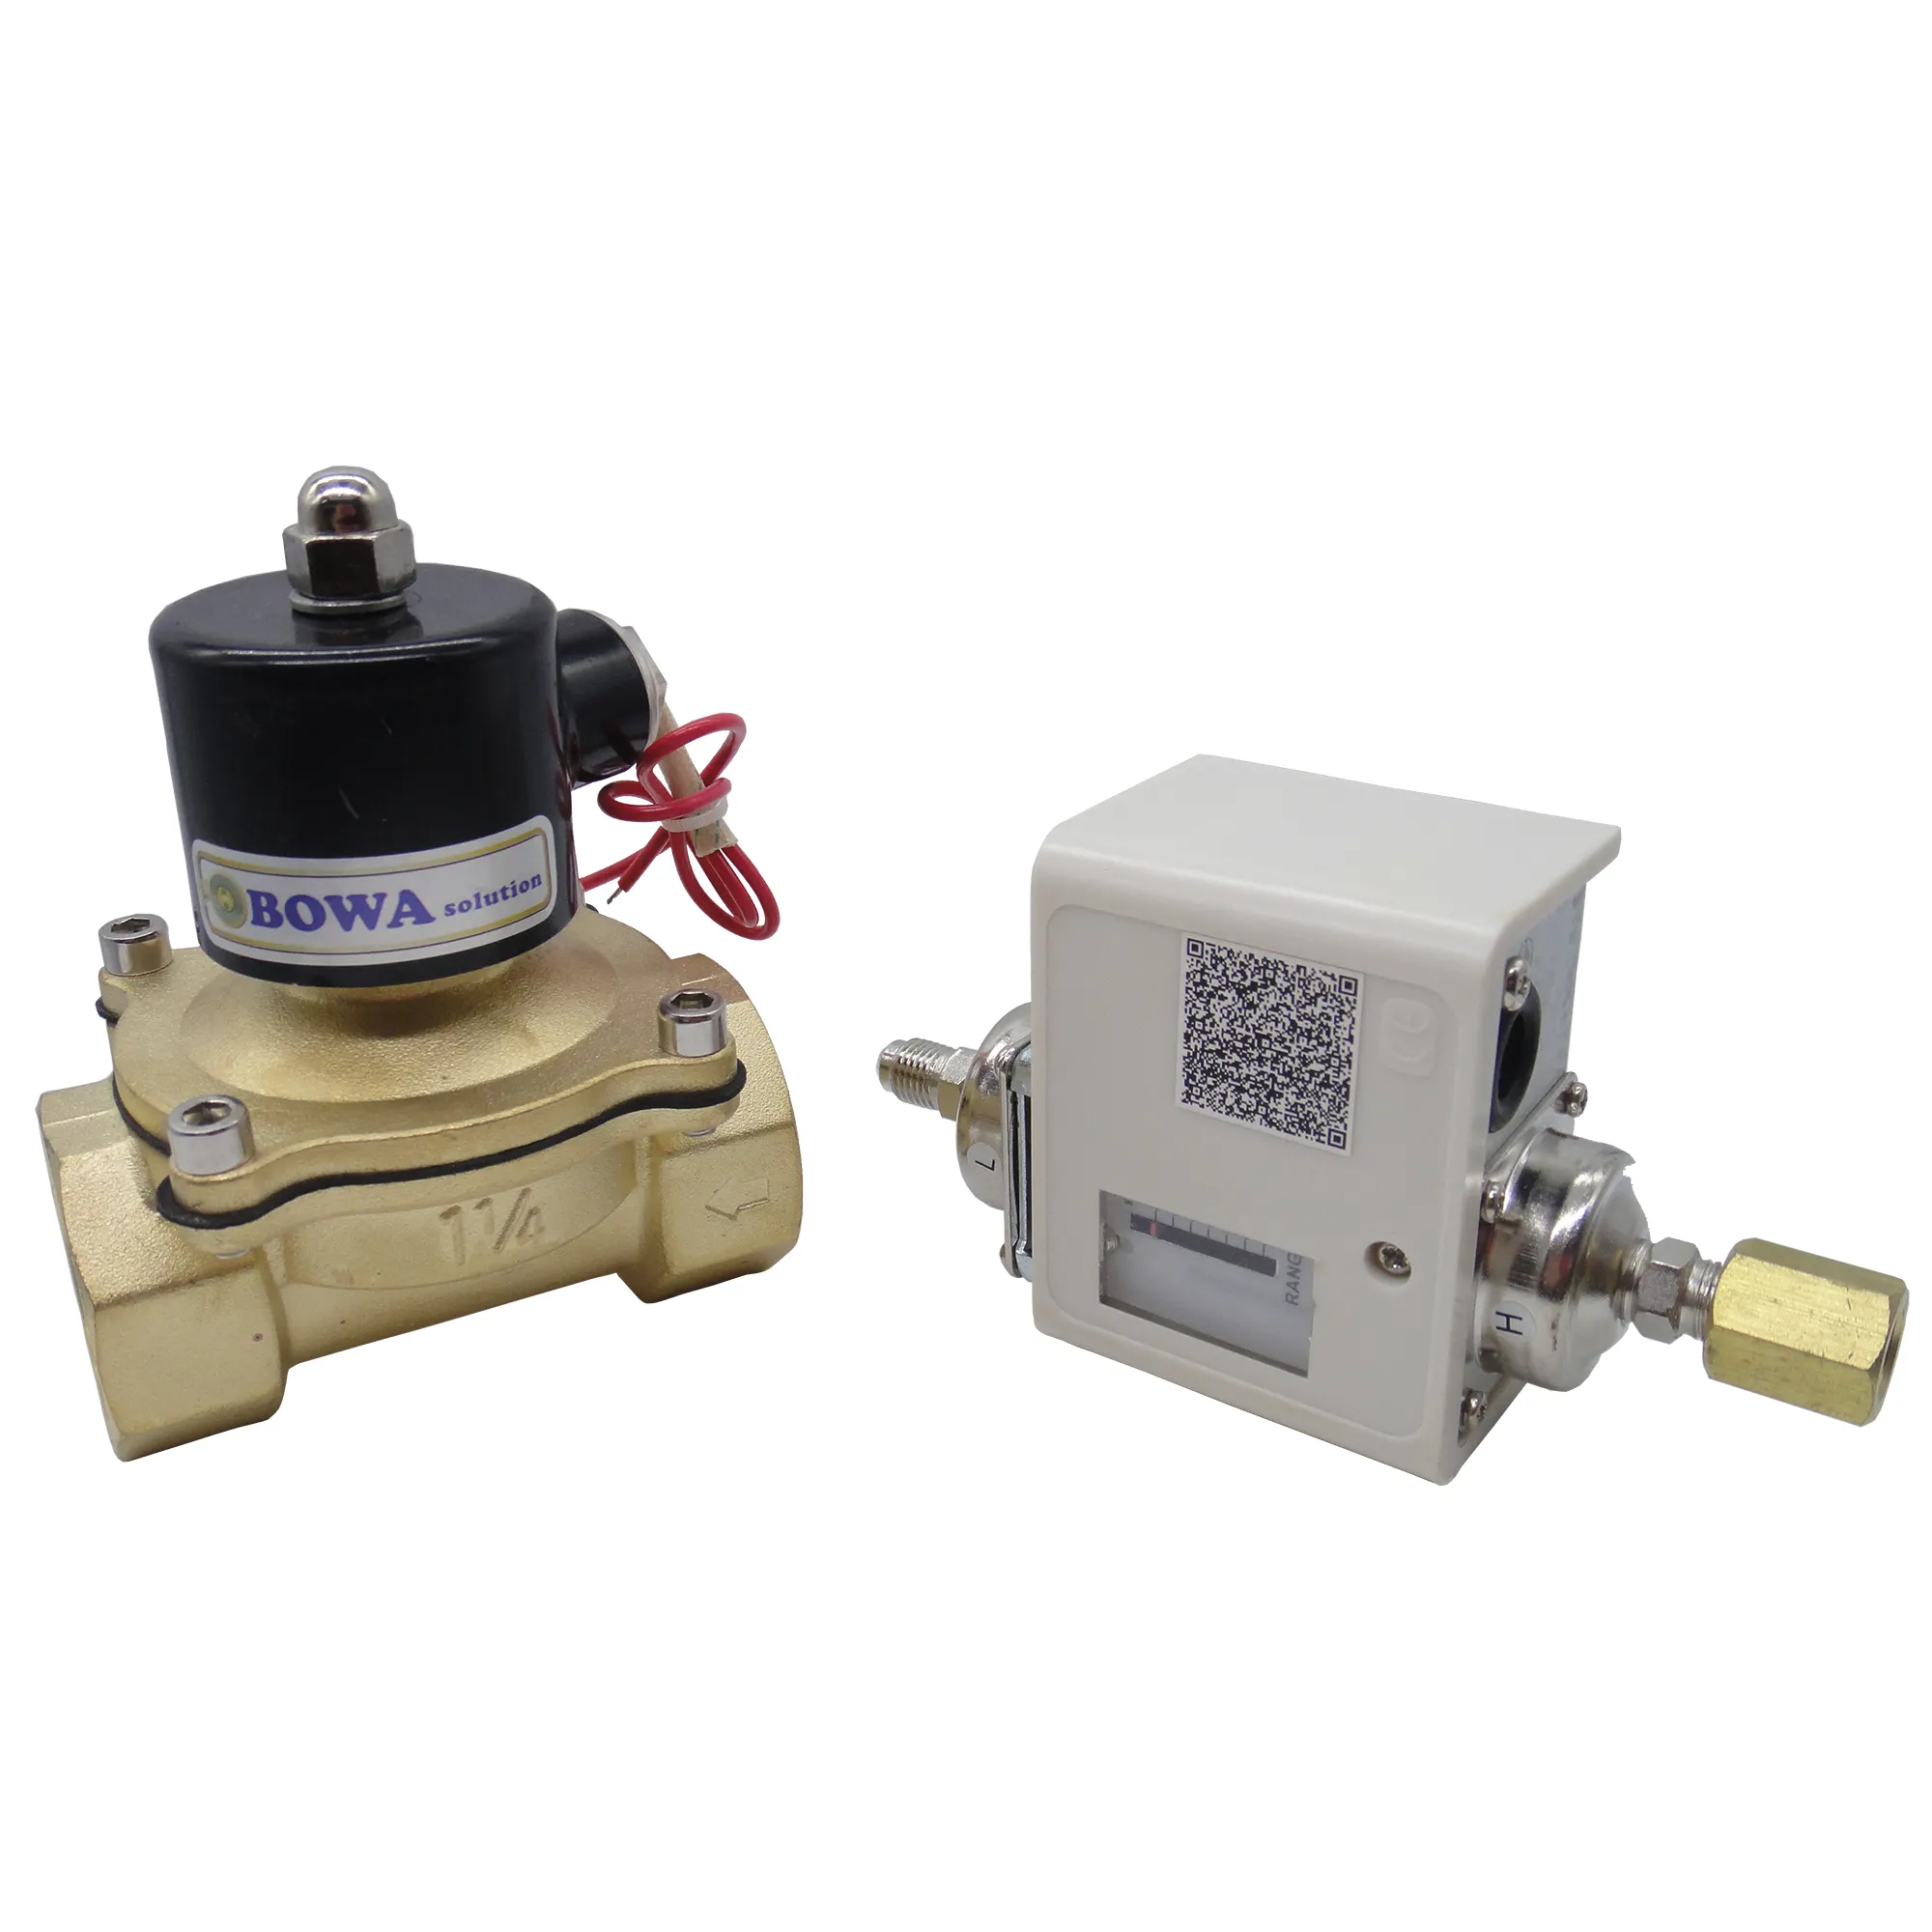 DN32 (G1-1/4") universal automatic bypass valve kits can be adjusted by water pump and pressure drop of fluid loops at the site